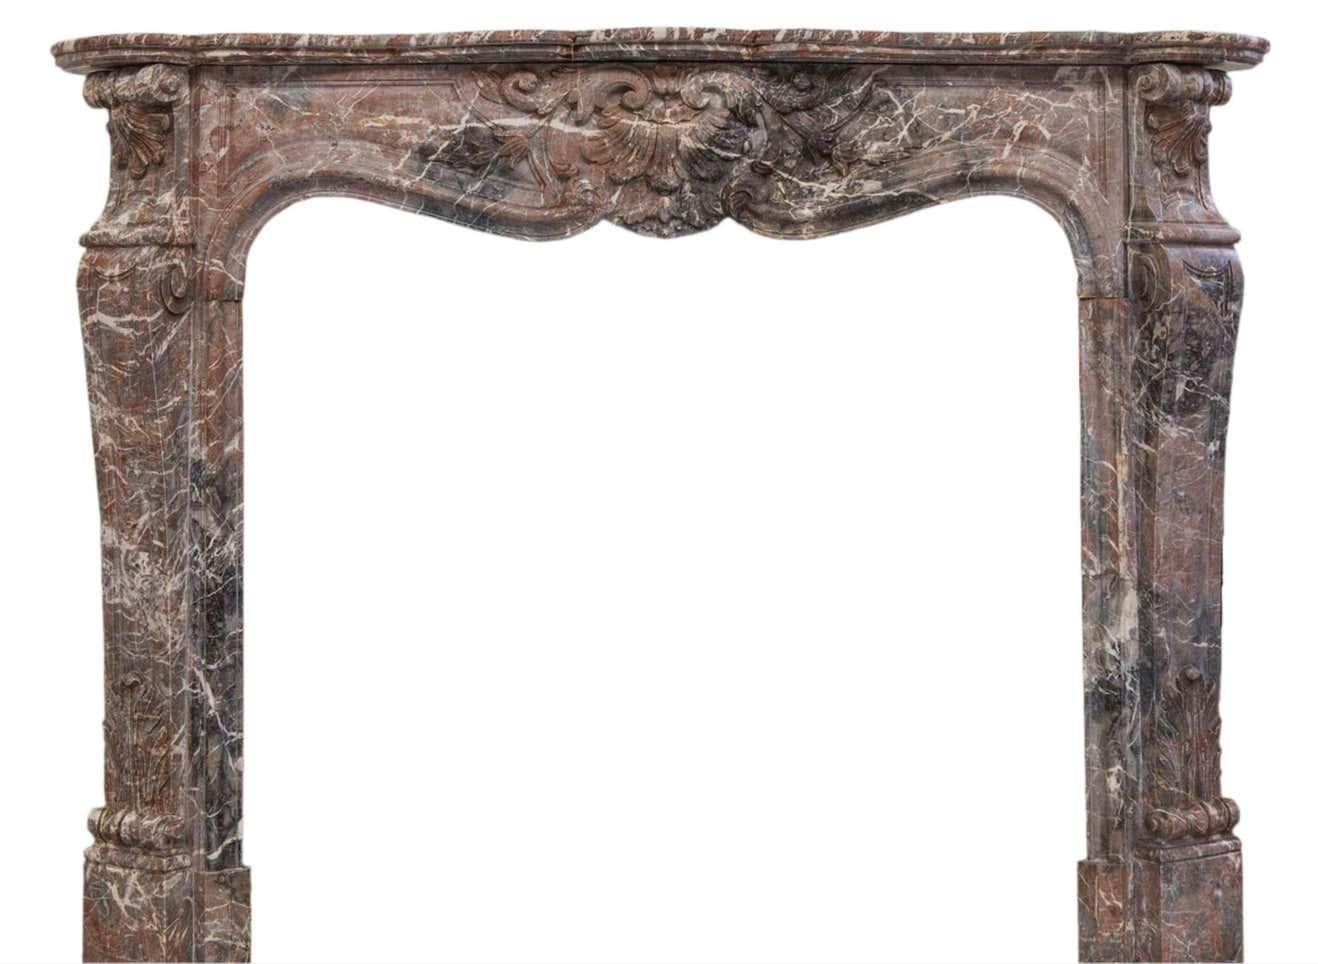 19th century Louis XV style beautiful fireplace sculpted in a soft colored Rouge Royal marble. The finely carved shelf rests on a serpentine front, with a rocaille shell framed by flowers. The jambs are hand carved in the form of curved and tapered